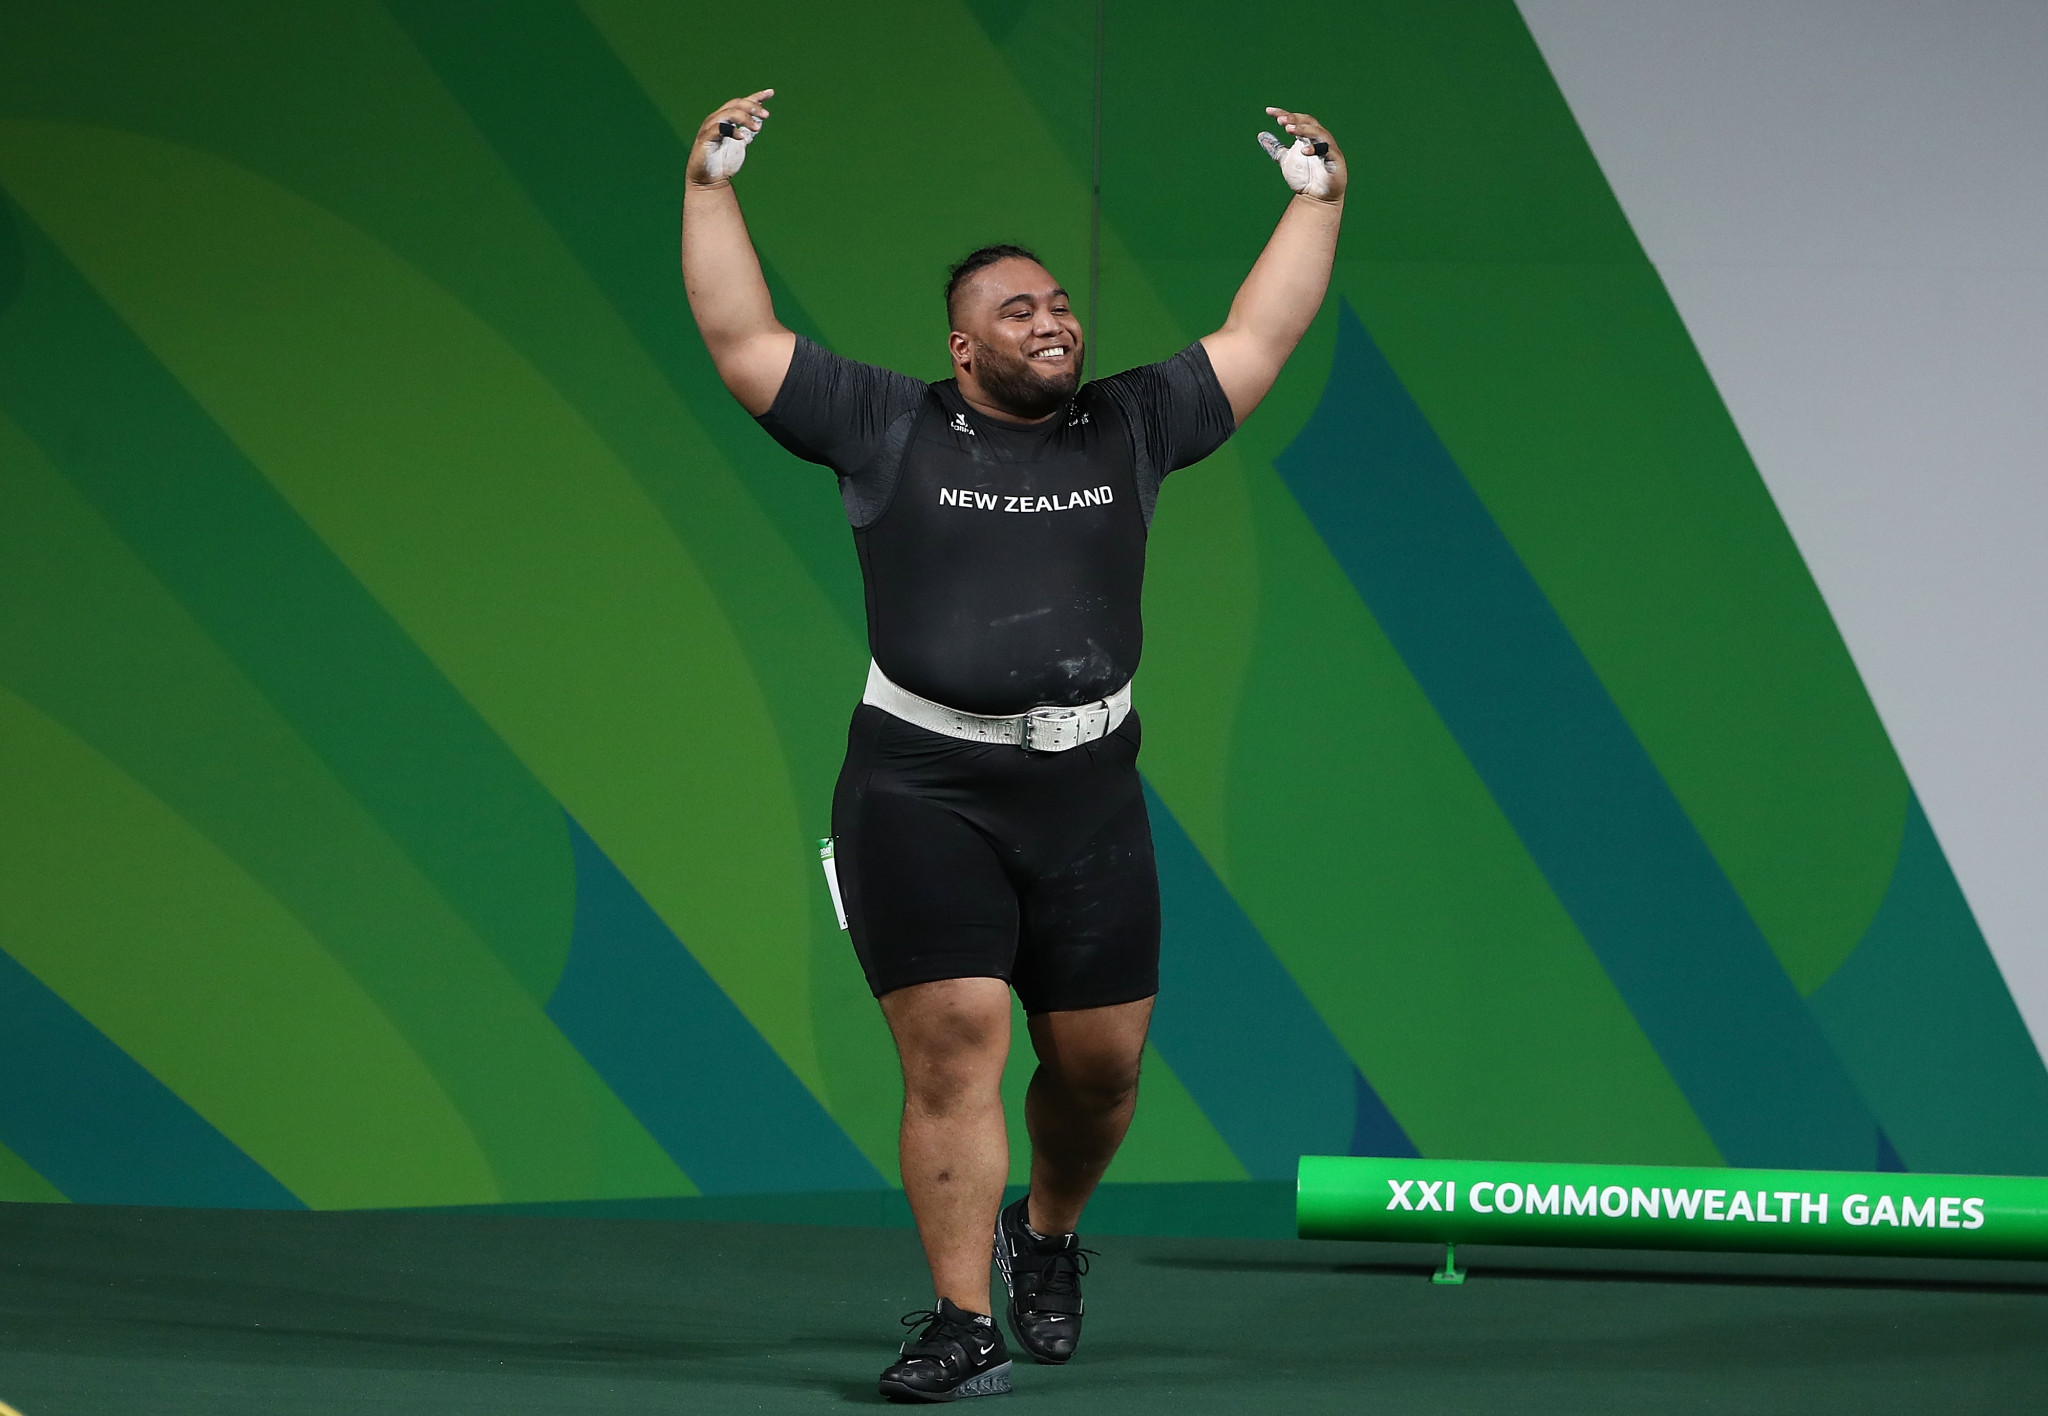 David Liti is carrying on New Zealand's tradition in super heavyweight weightlifting ©Getty Images